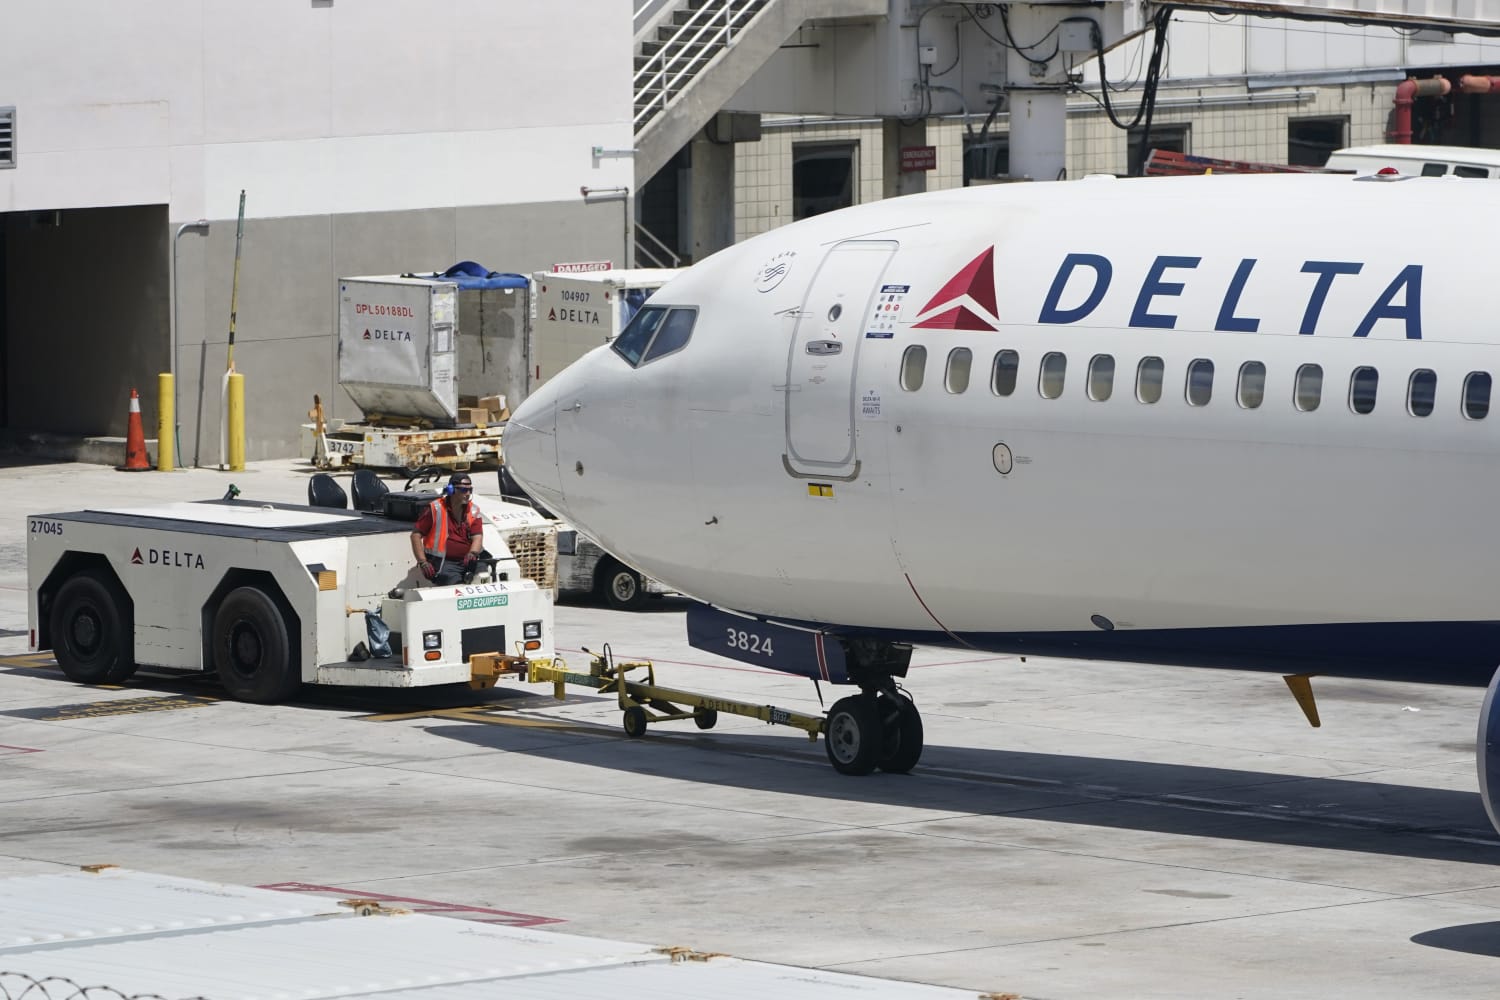 Apparent diarrhea incident forces Delta flight to Barcelona to turn back